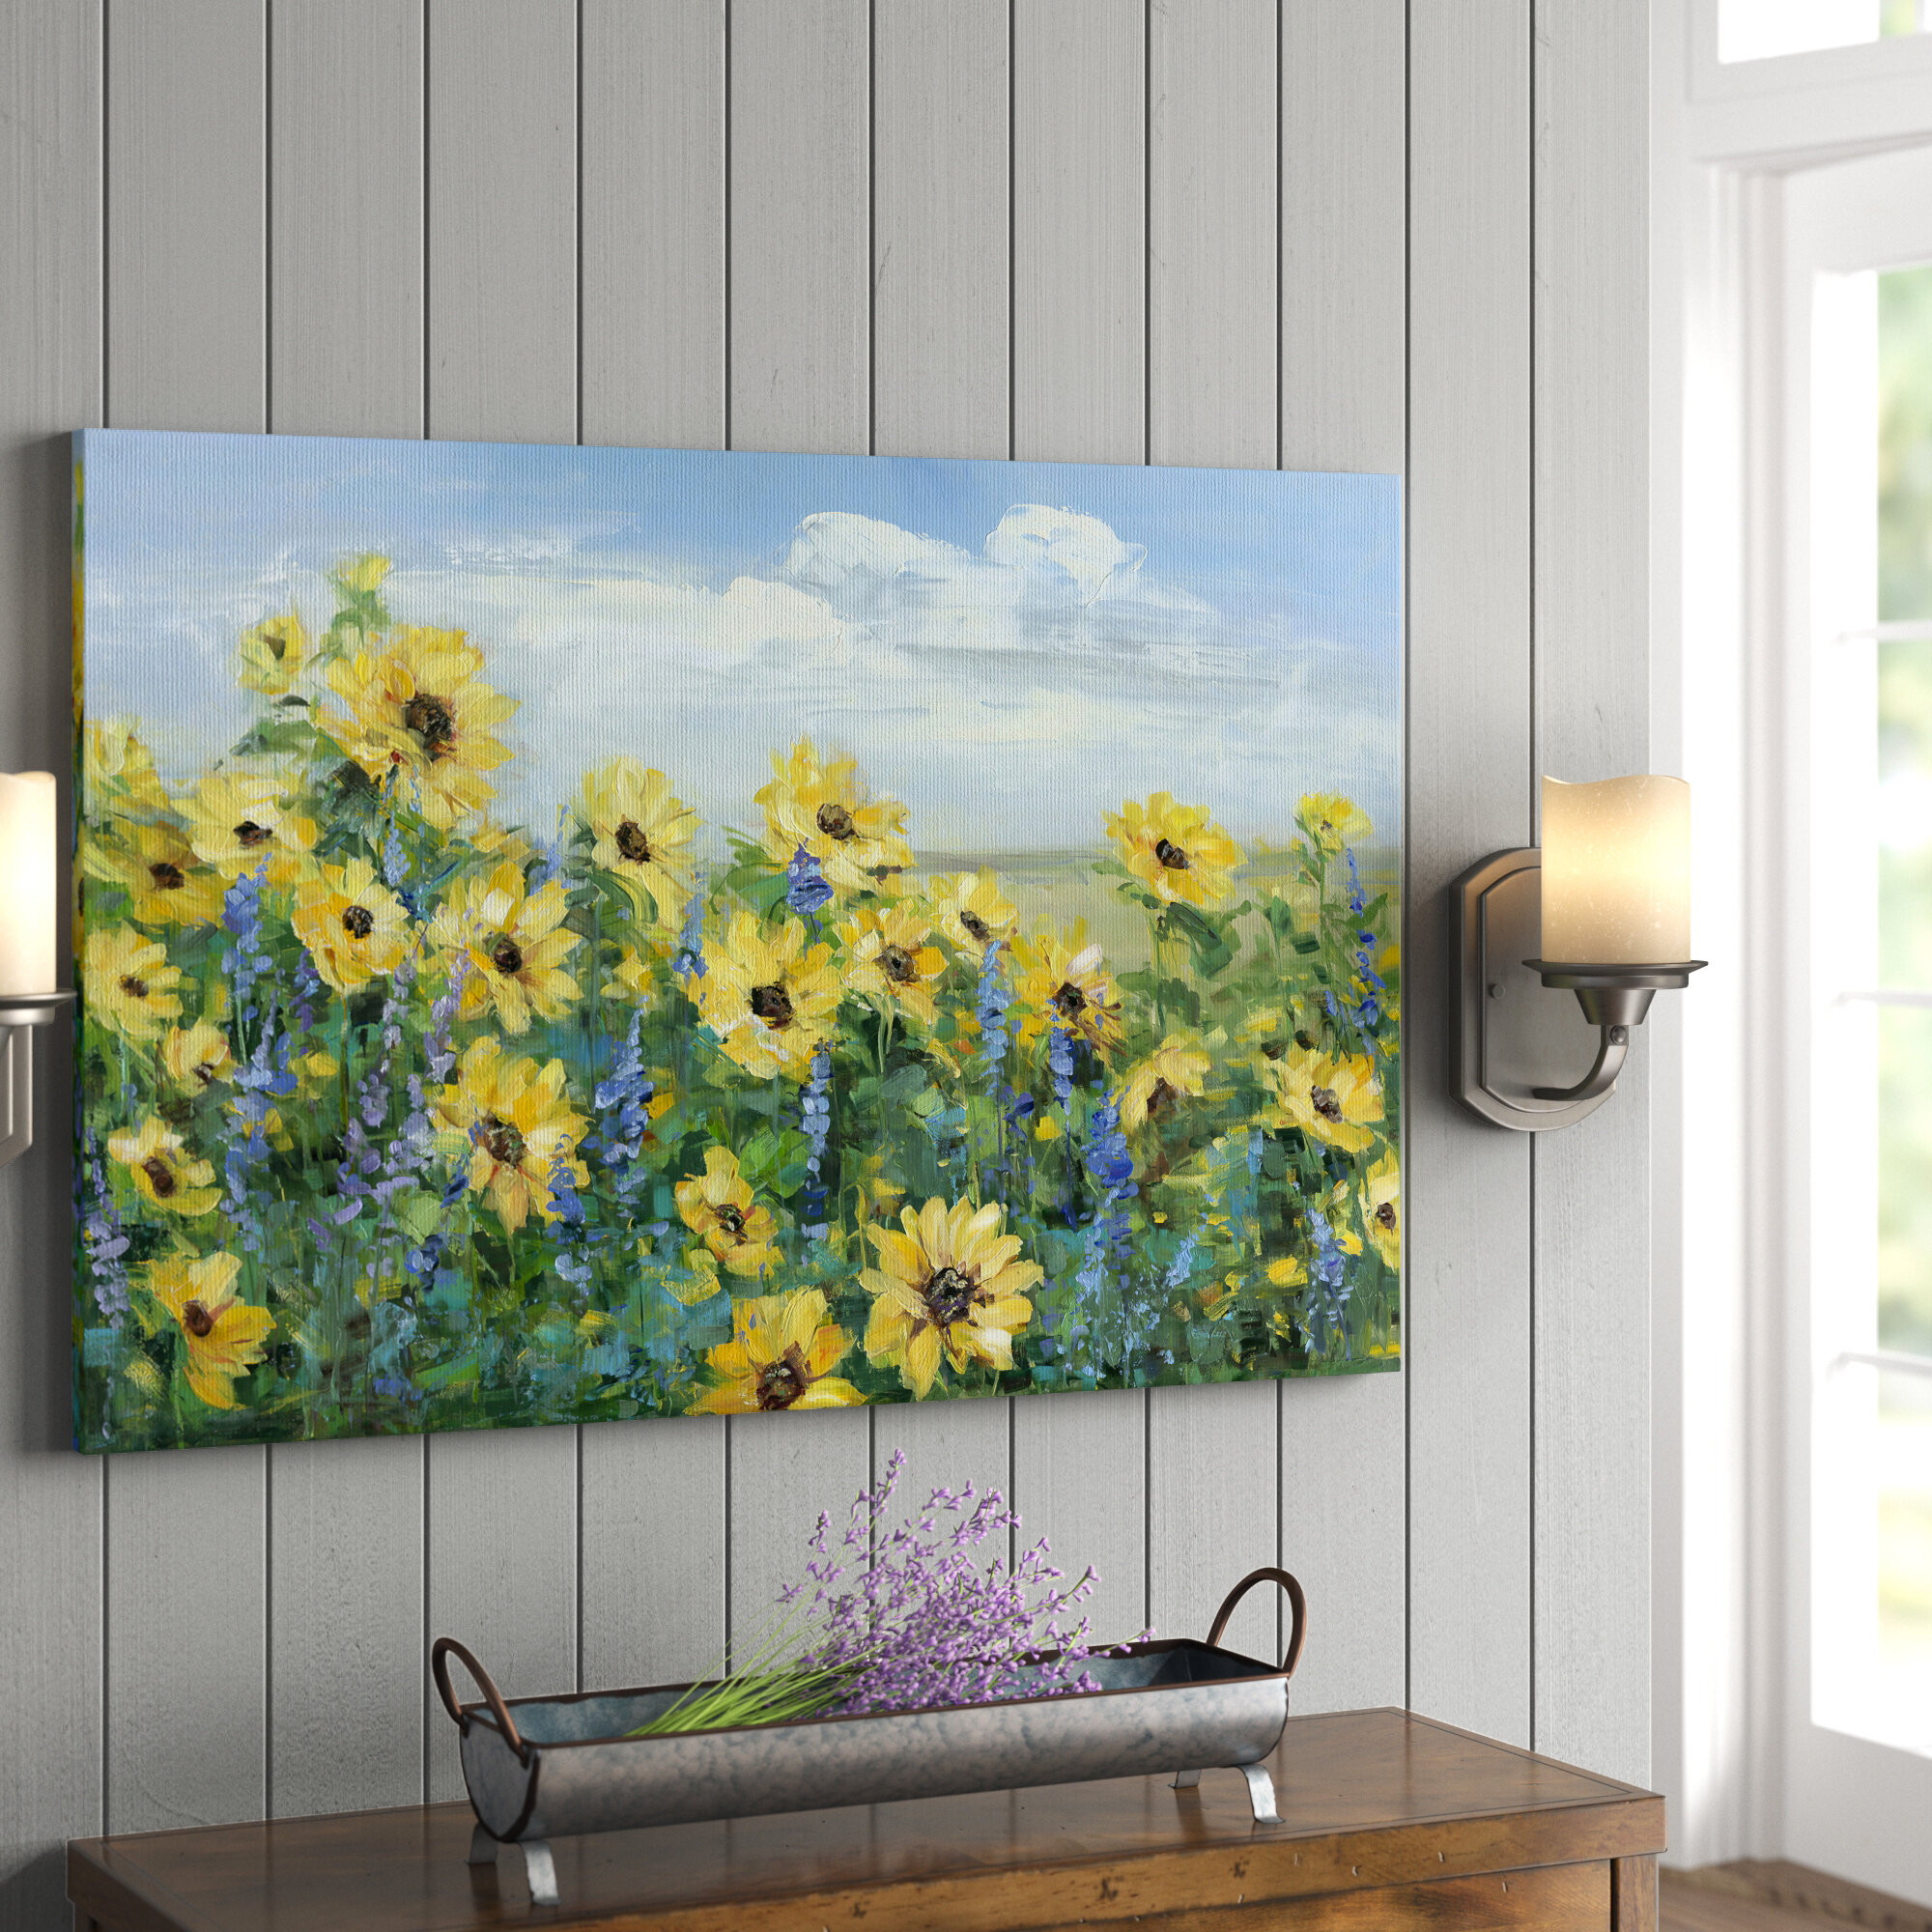 Custom Sunflower Wall Art - Fabric Pictures - The Quilted Jardin